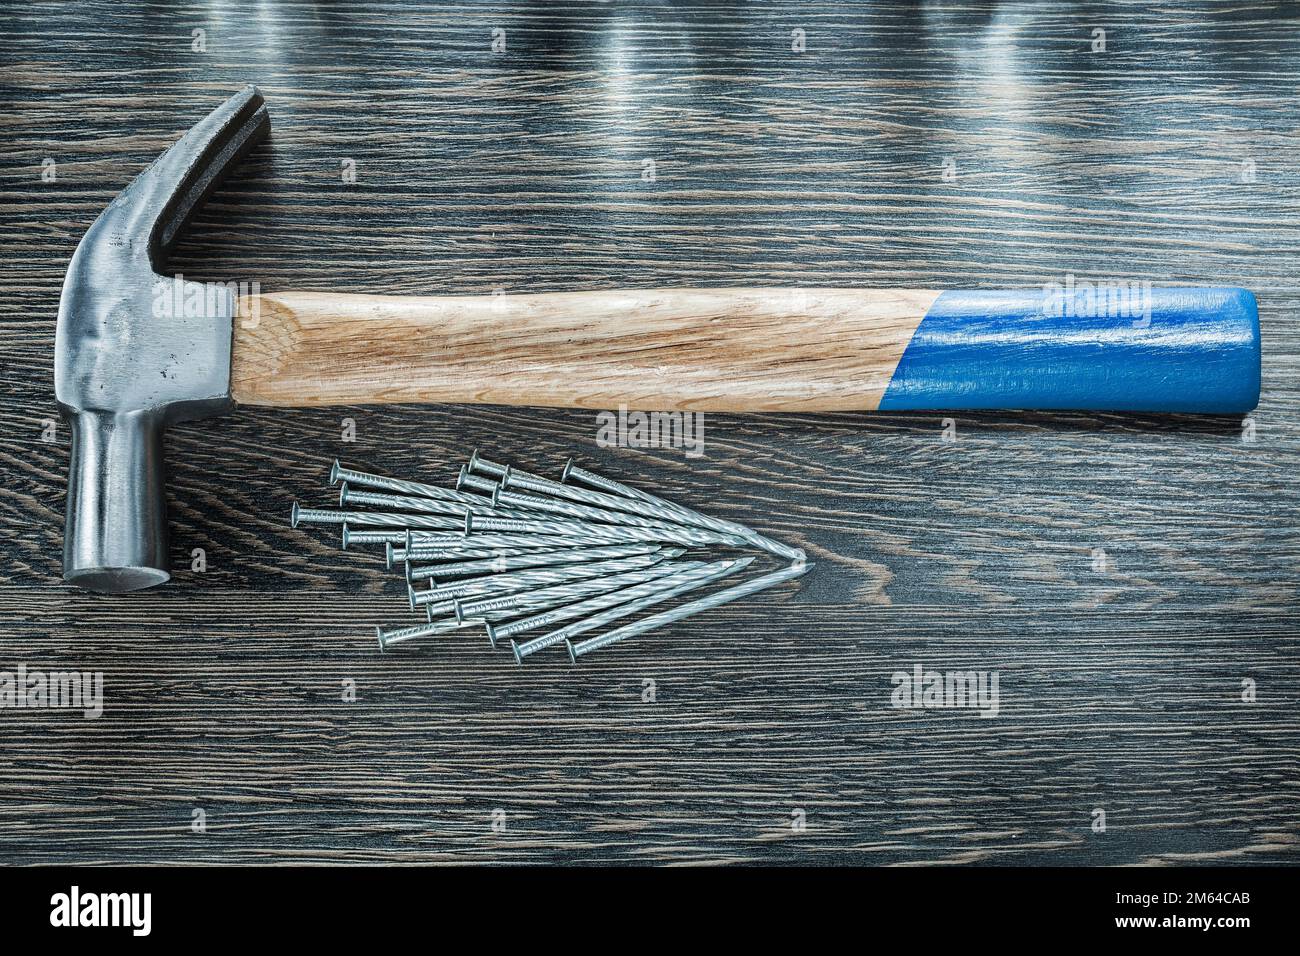 Stack of construction nails claw hammer on wooden board. Stock Photo